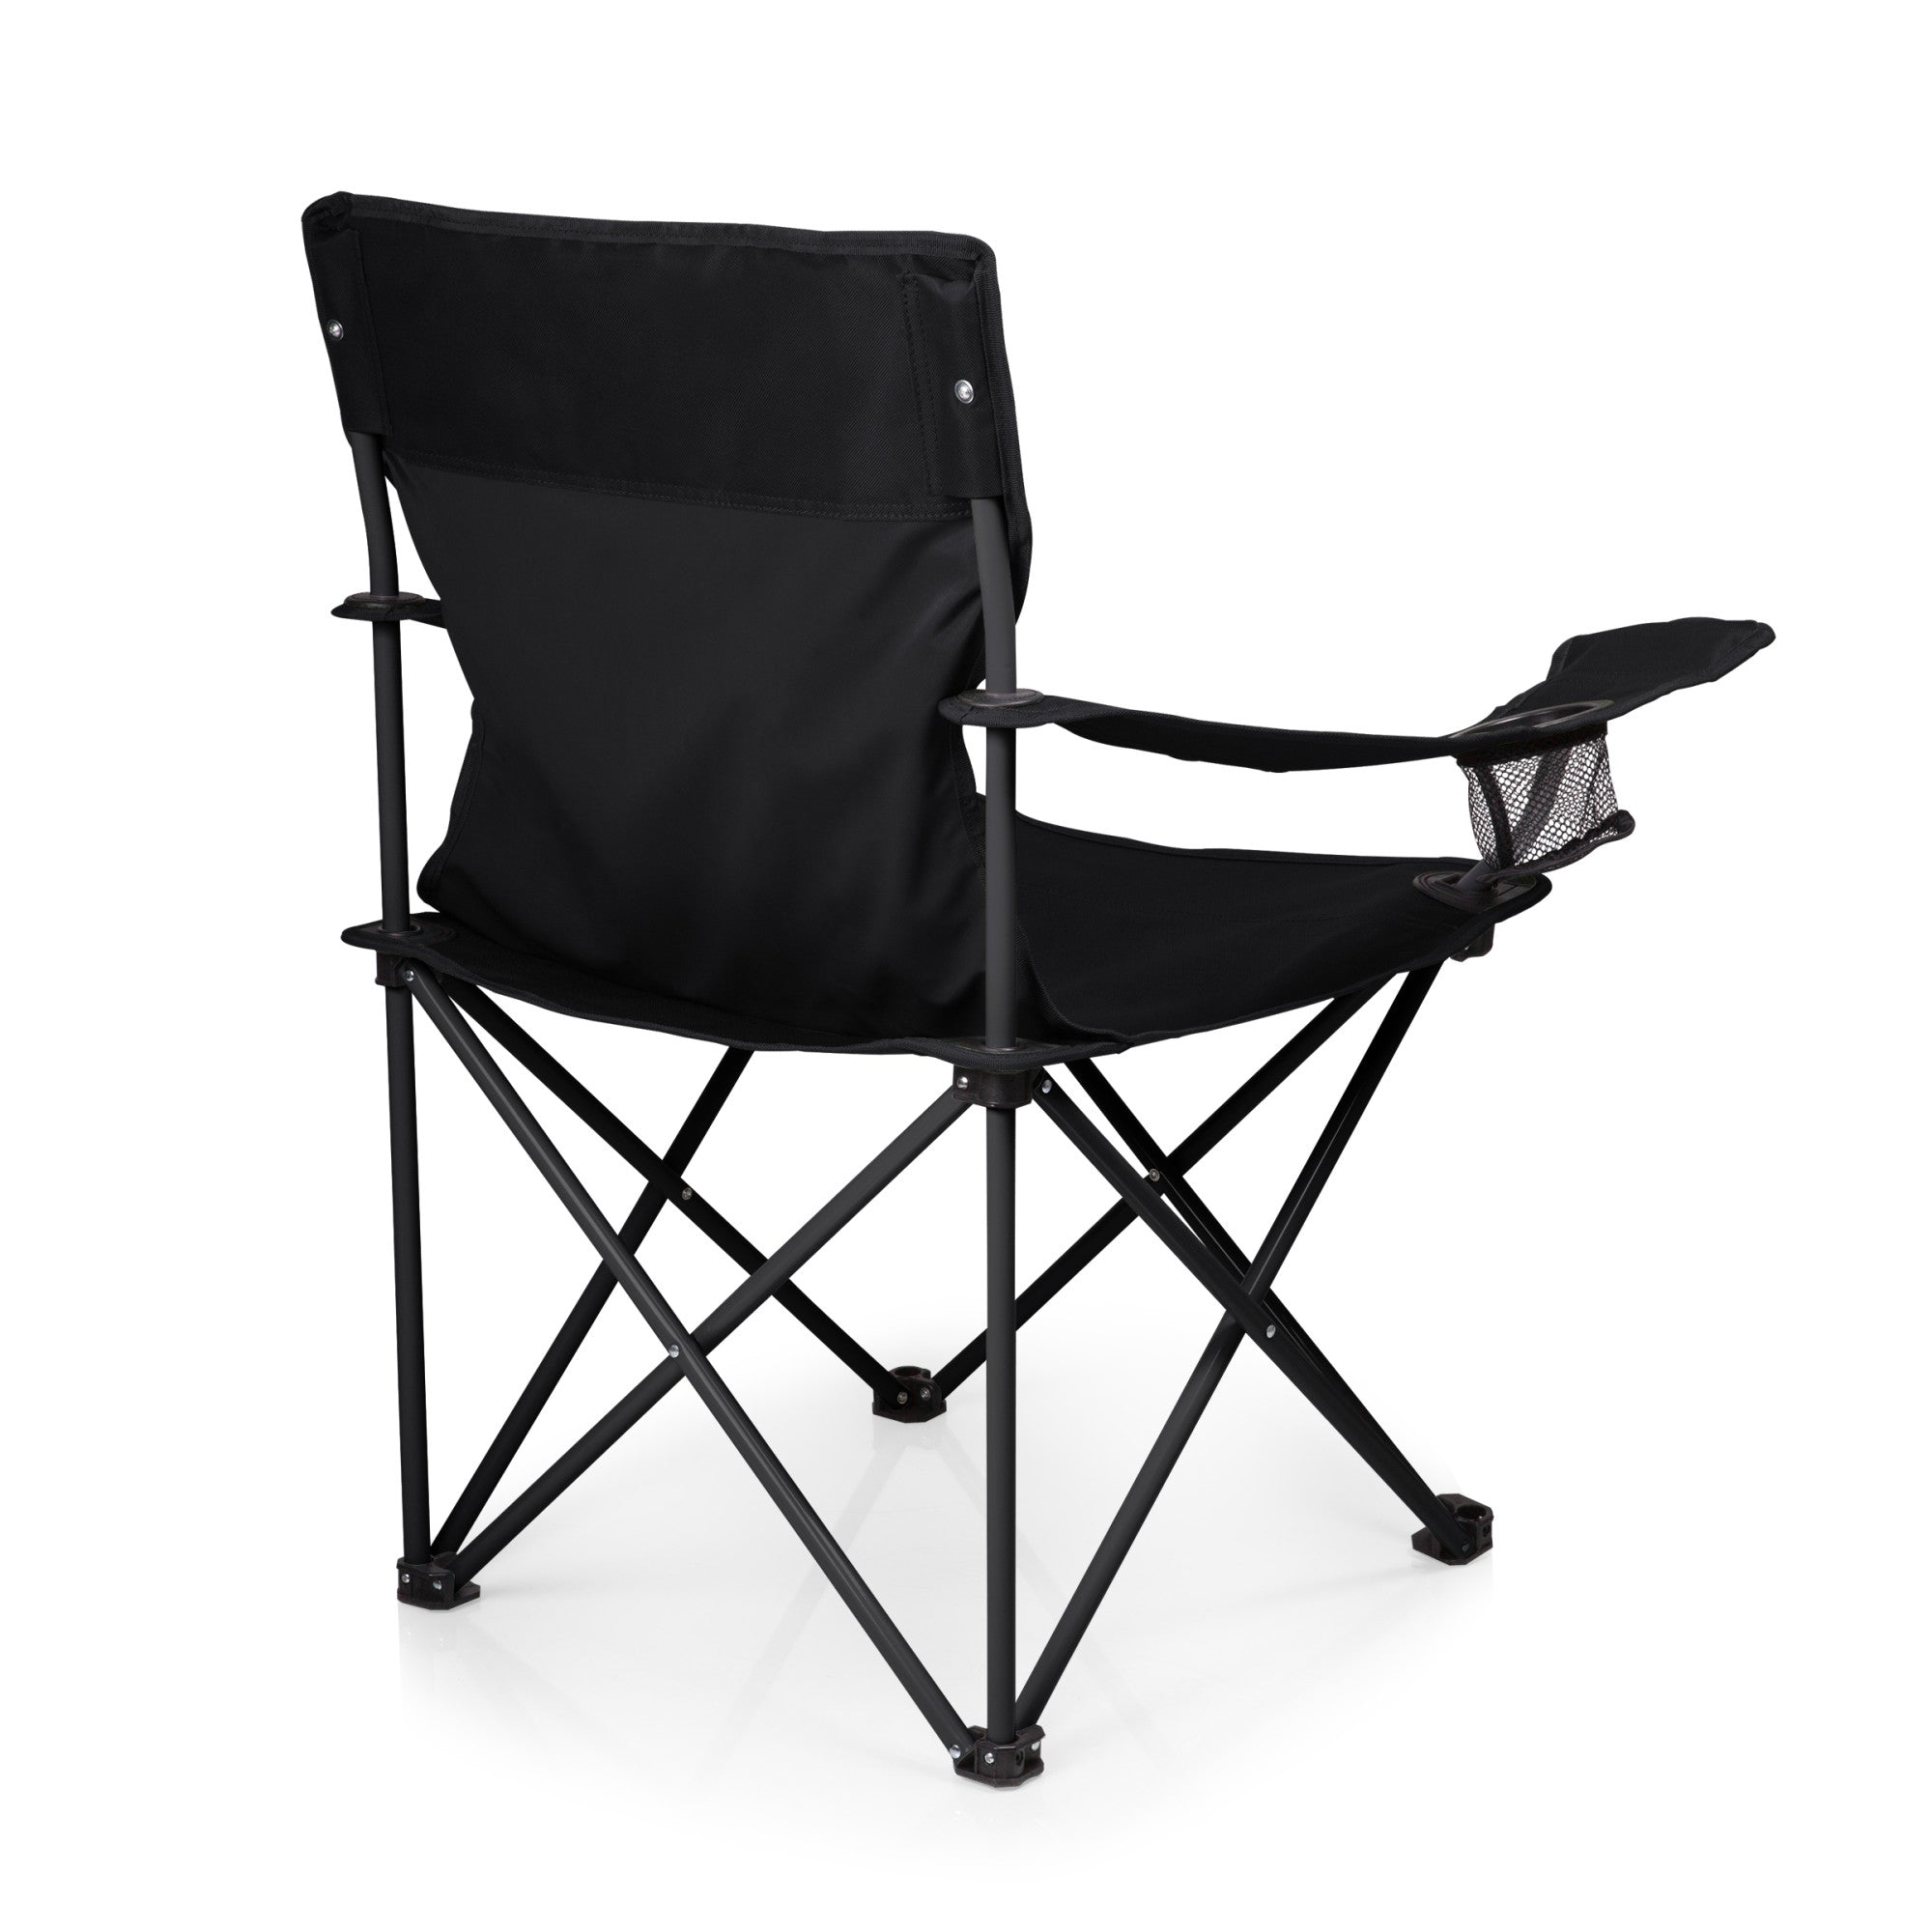 Foot Stool Camping Chair Folding Lawn Chair With Comfortable Handle Outdoor  Foldable Fishing Chair For Field Sketching Picnic